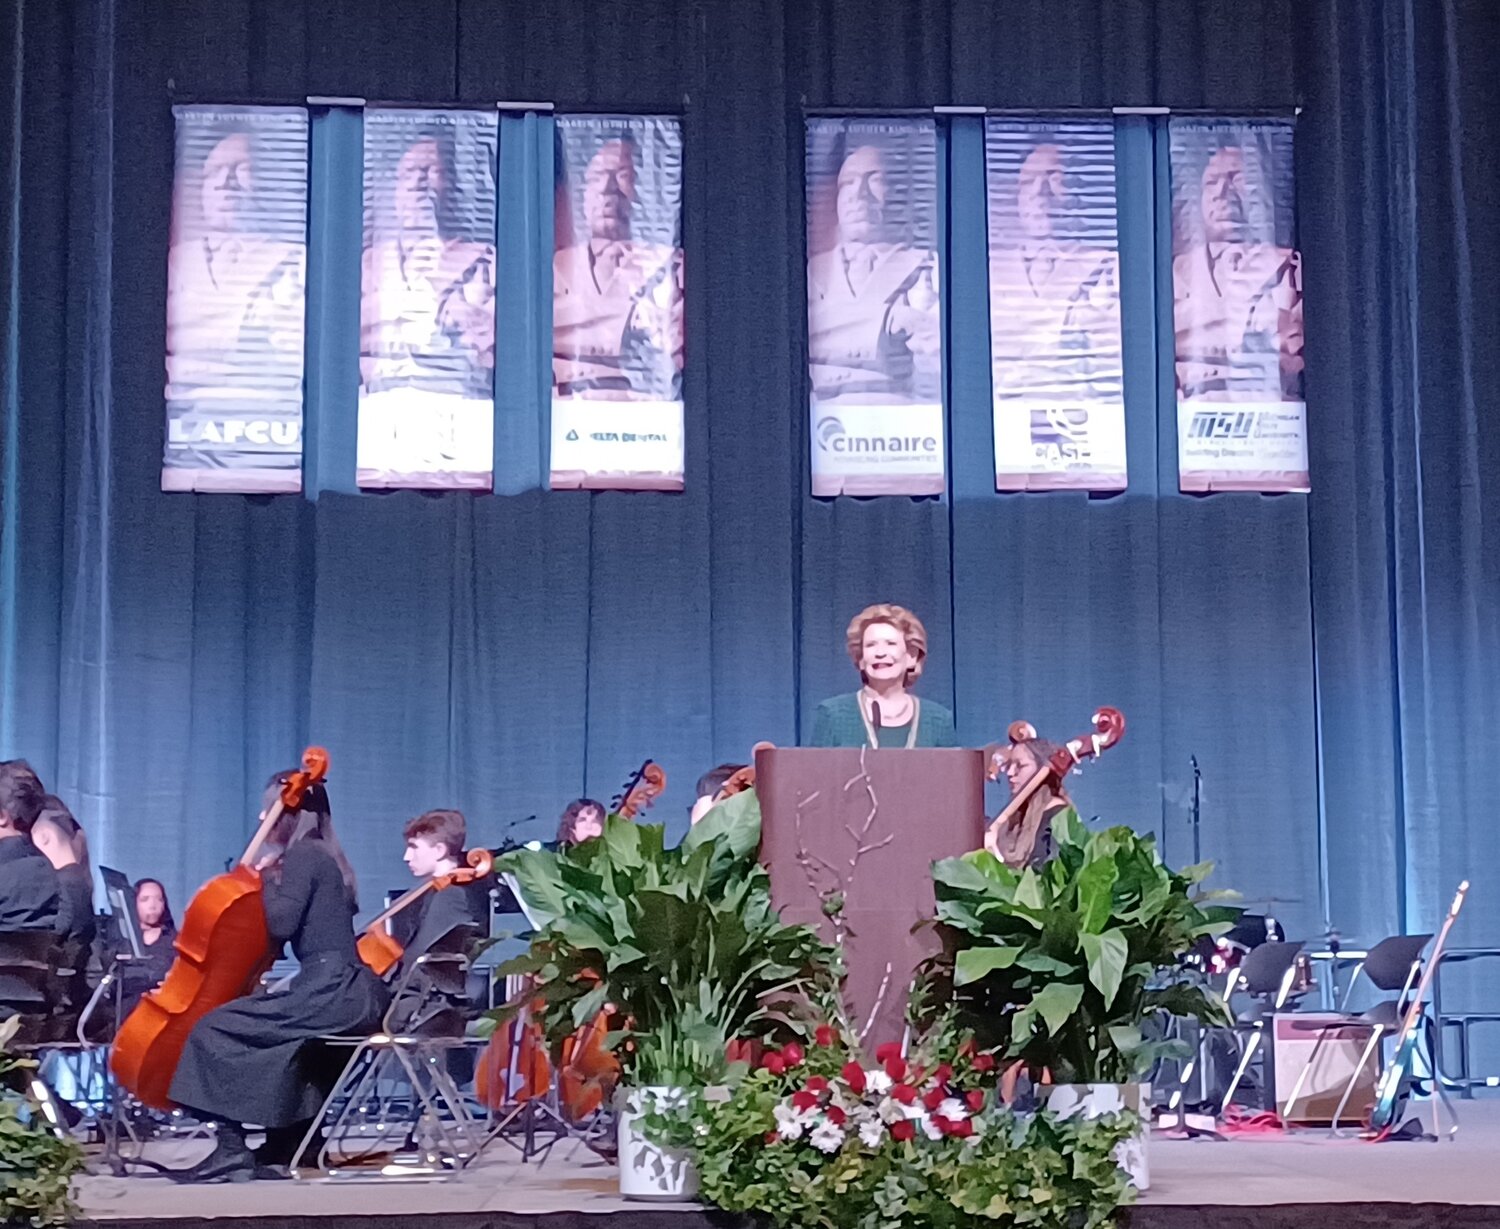 U.S. Sen. Debbie Stabenow, D-Michigan, said she was attending the luncheon for the last time as an elected official. She is retiring at the end of the year.